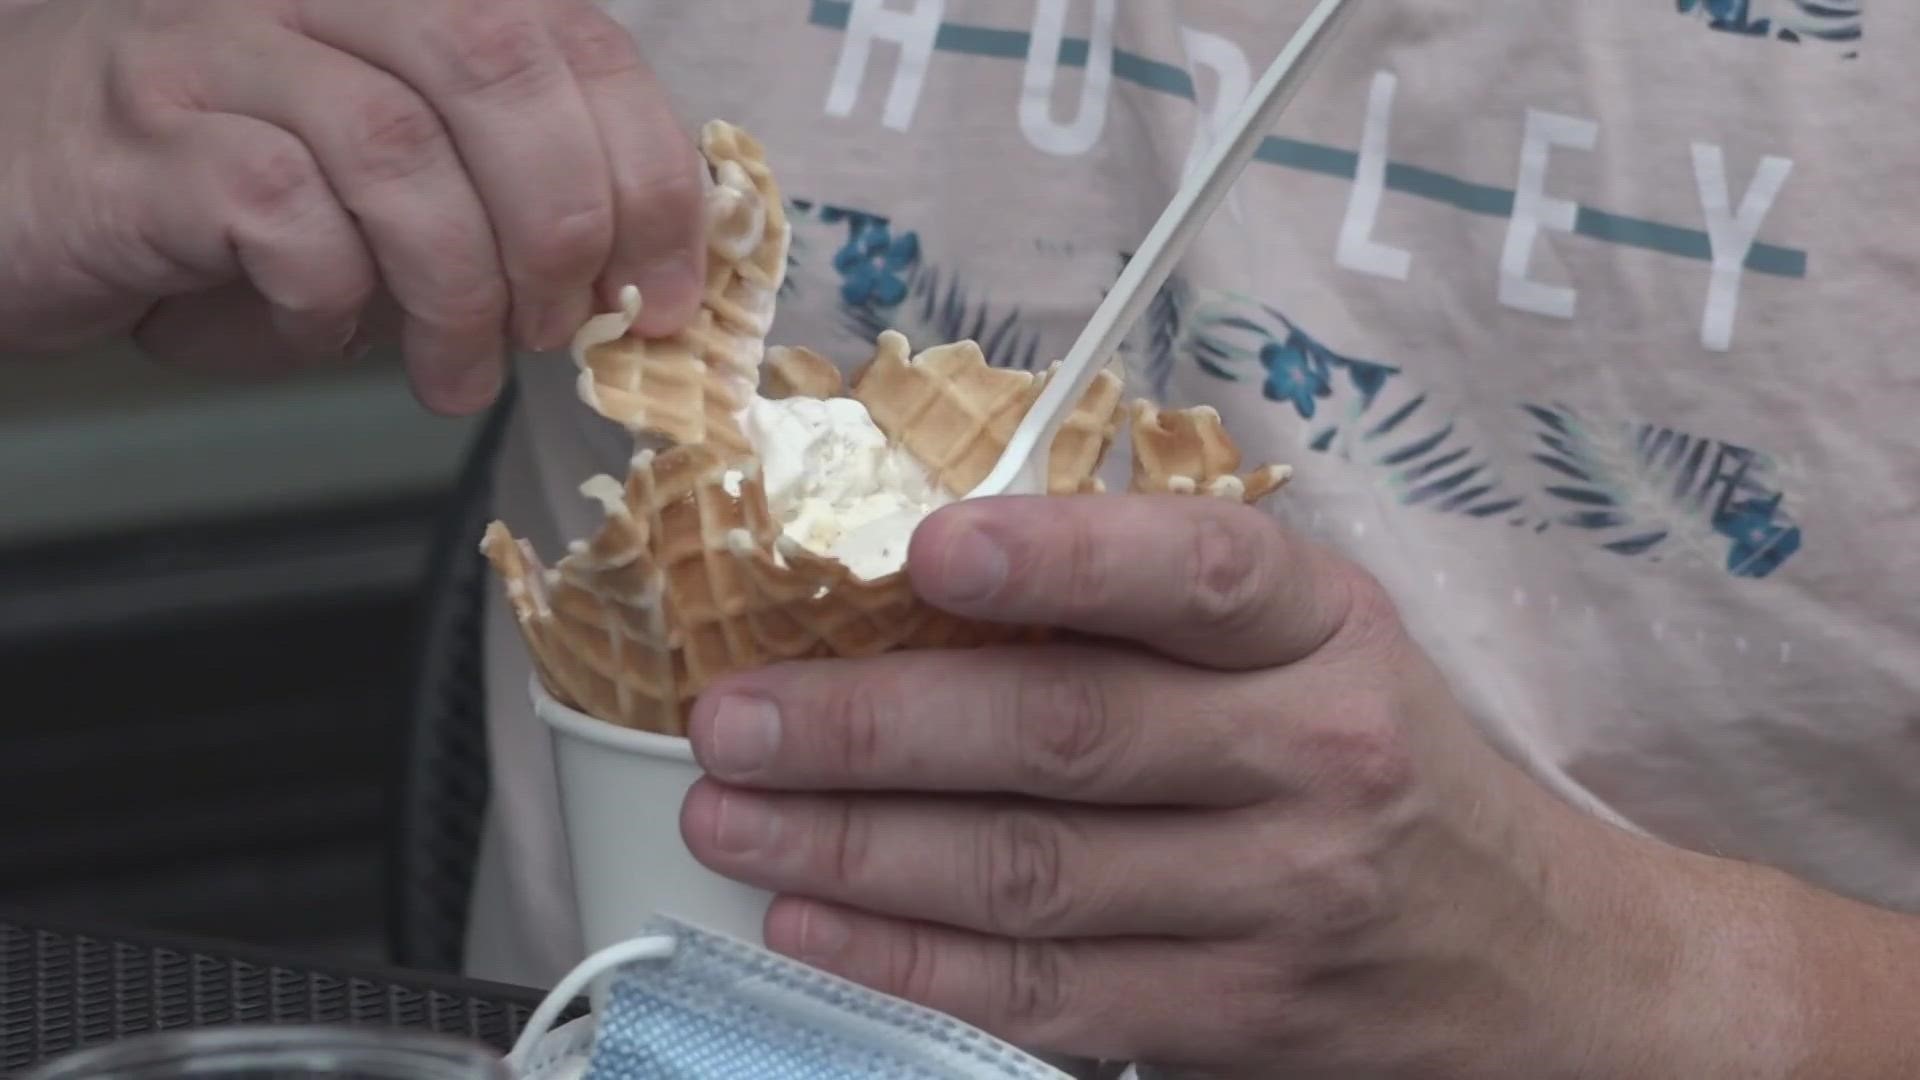 Saturday is Ice Cream for Breakfast Day. 5 On Your Side spoke to Clementine's Creamery owner Tamara Keefe about how the business is marking the occasion.